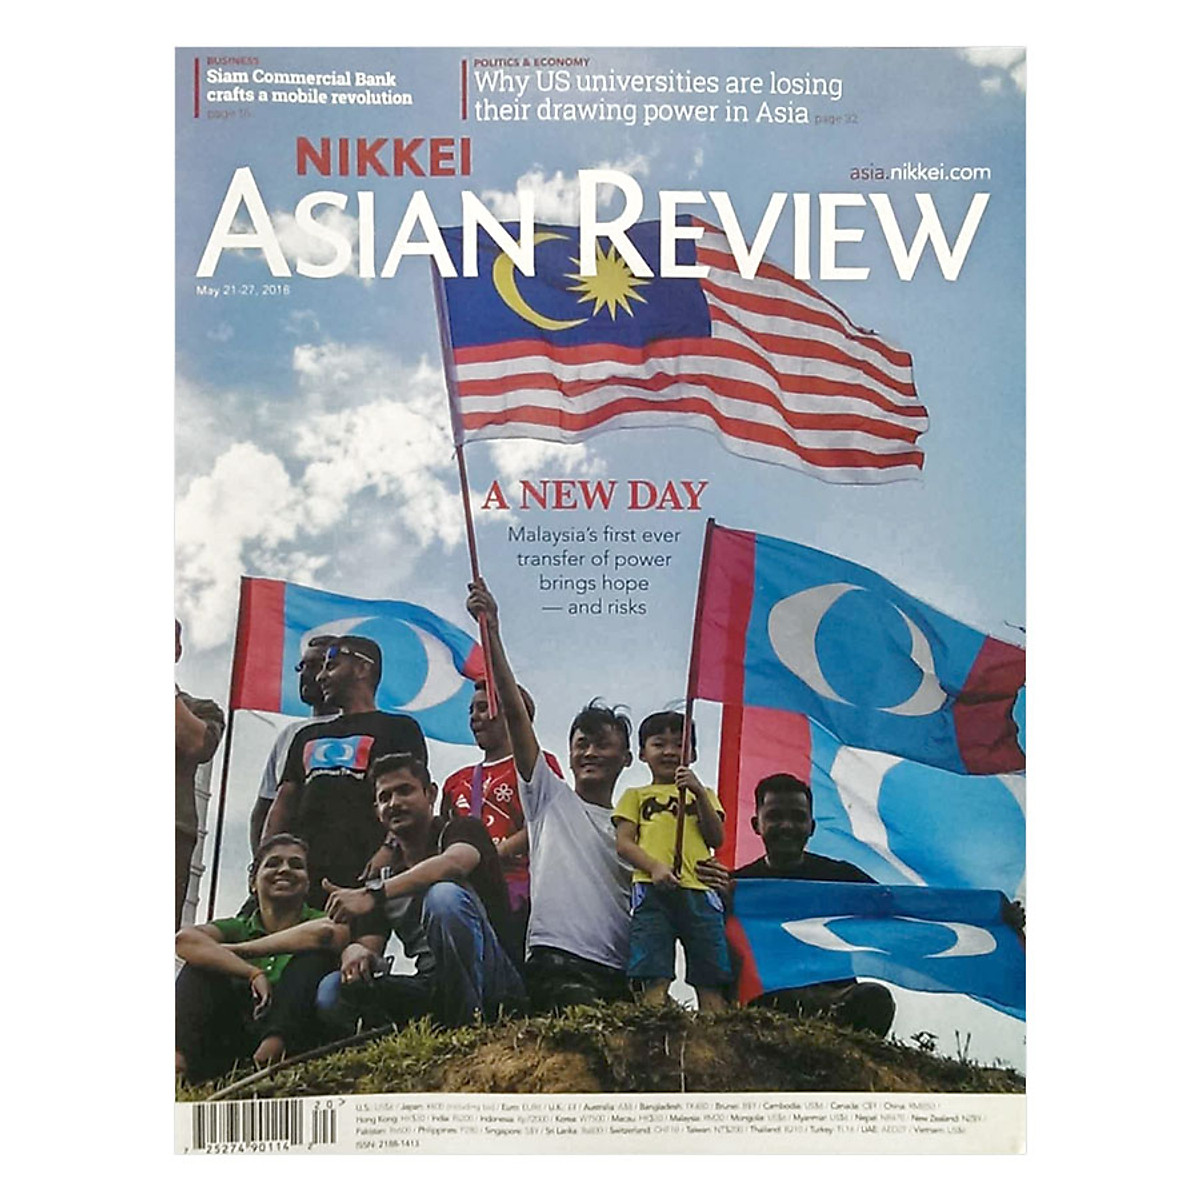 Nikkei Asian Review: A NEW DAY - 20